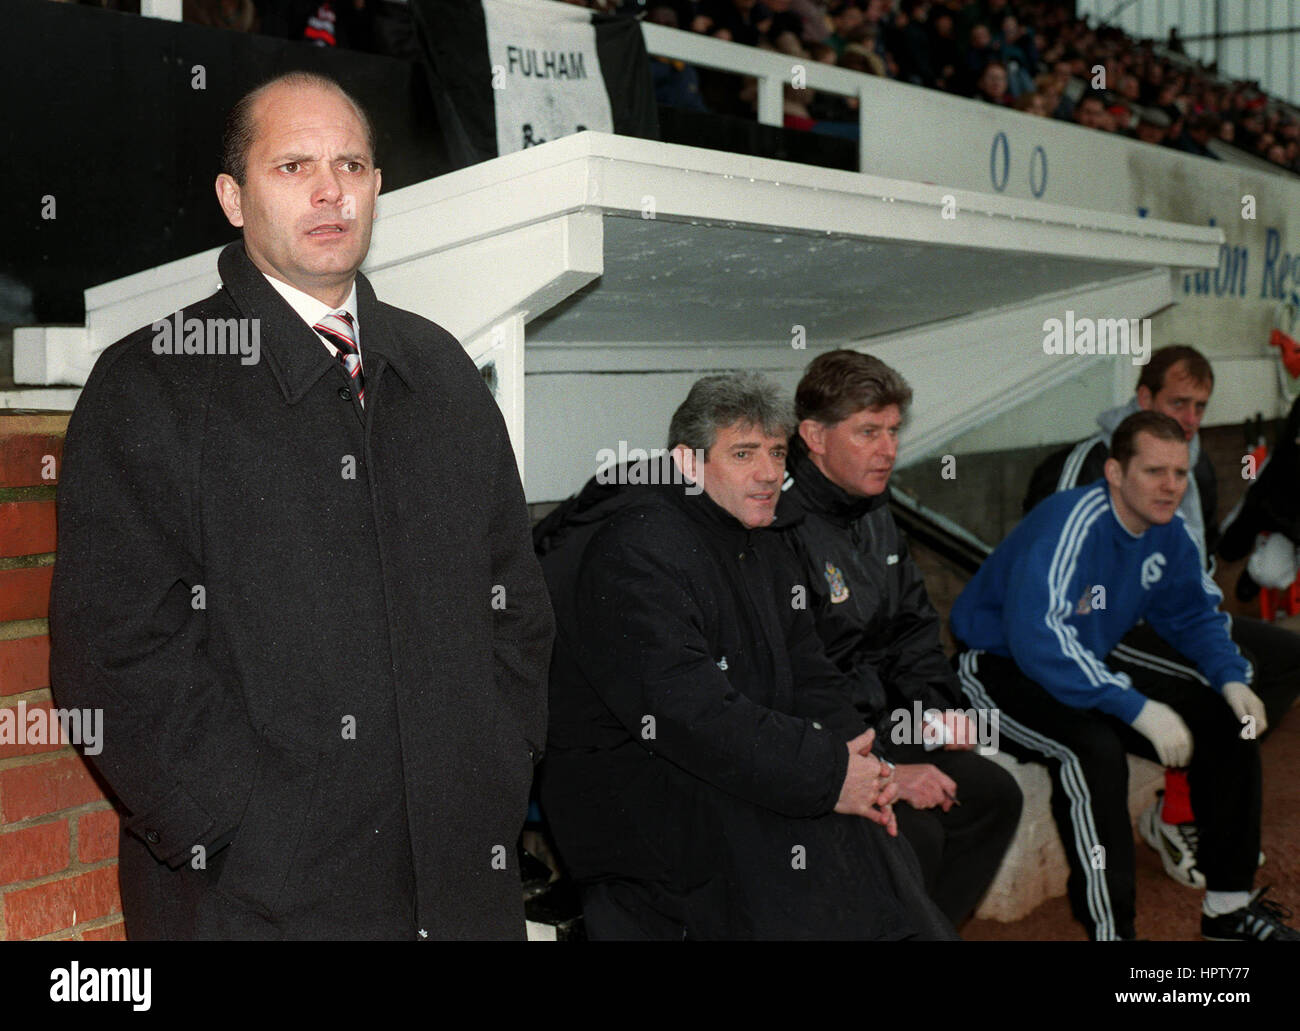 RAY WILKINS KEVIN KEEGAN FULHAM MANAGEMENT TEAM 08 January 1998 Stock Photo